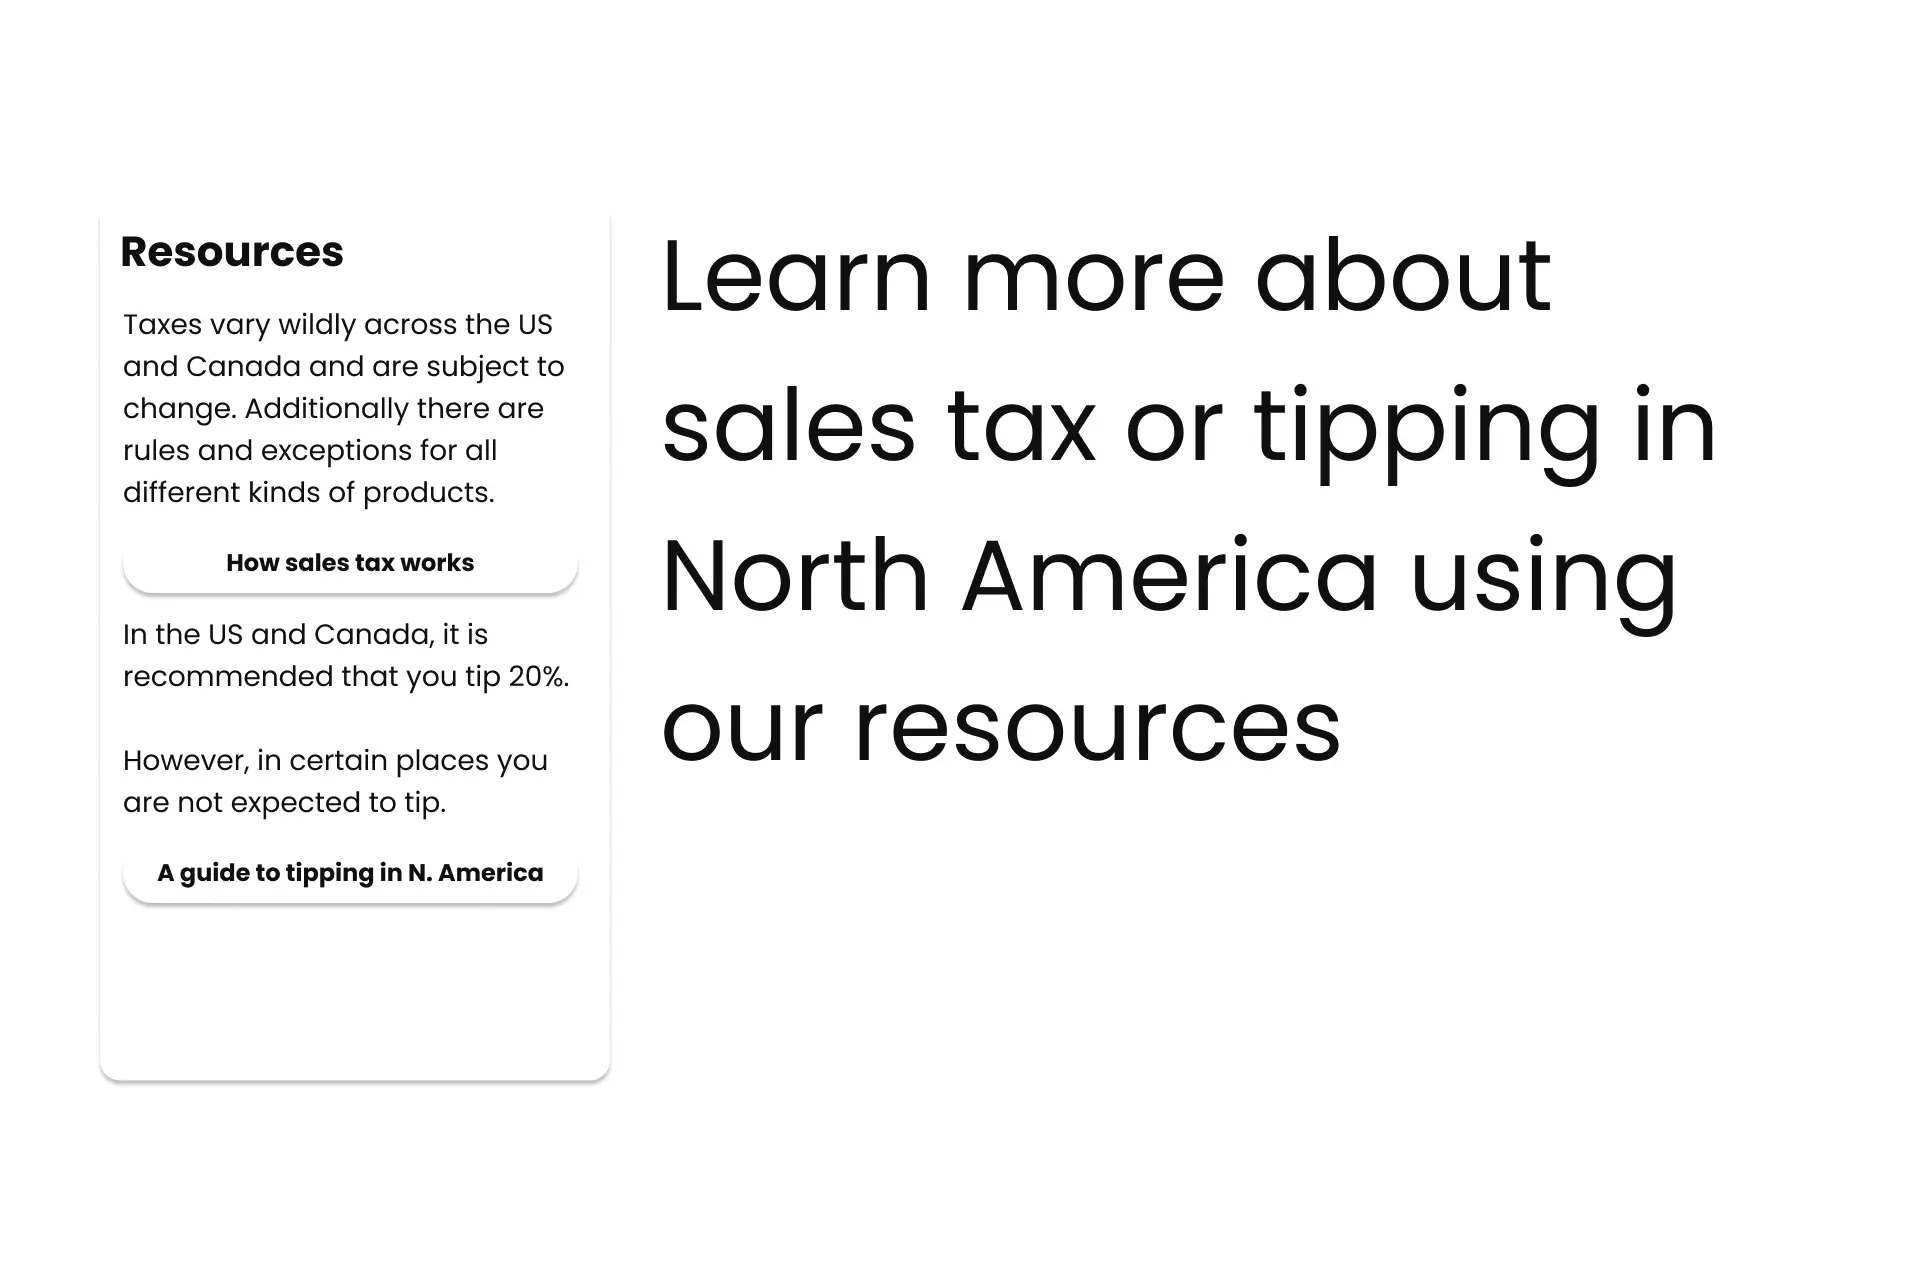 <p>A graphic showing how Price After offers you ways to learn more about sales tax and tipping in America, next to it sits the following text “Learn more about sales tax or tipping in North America using our resources.”</p>